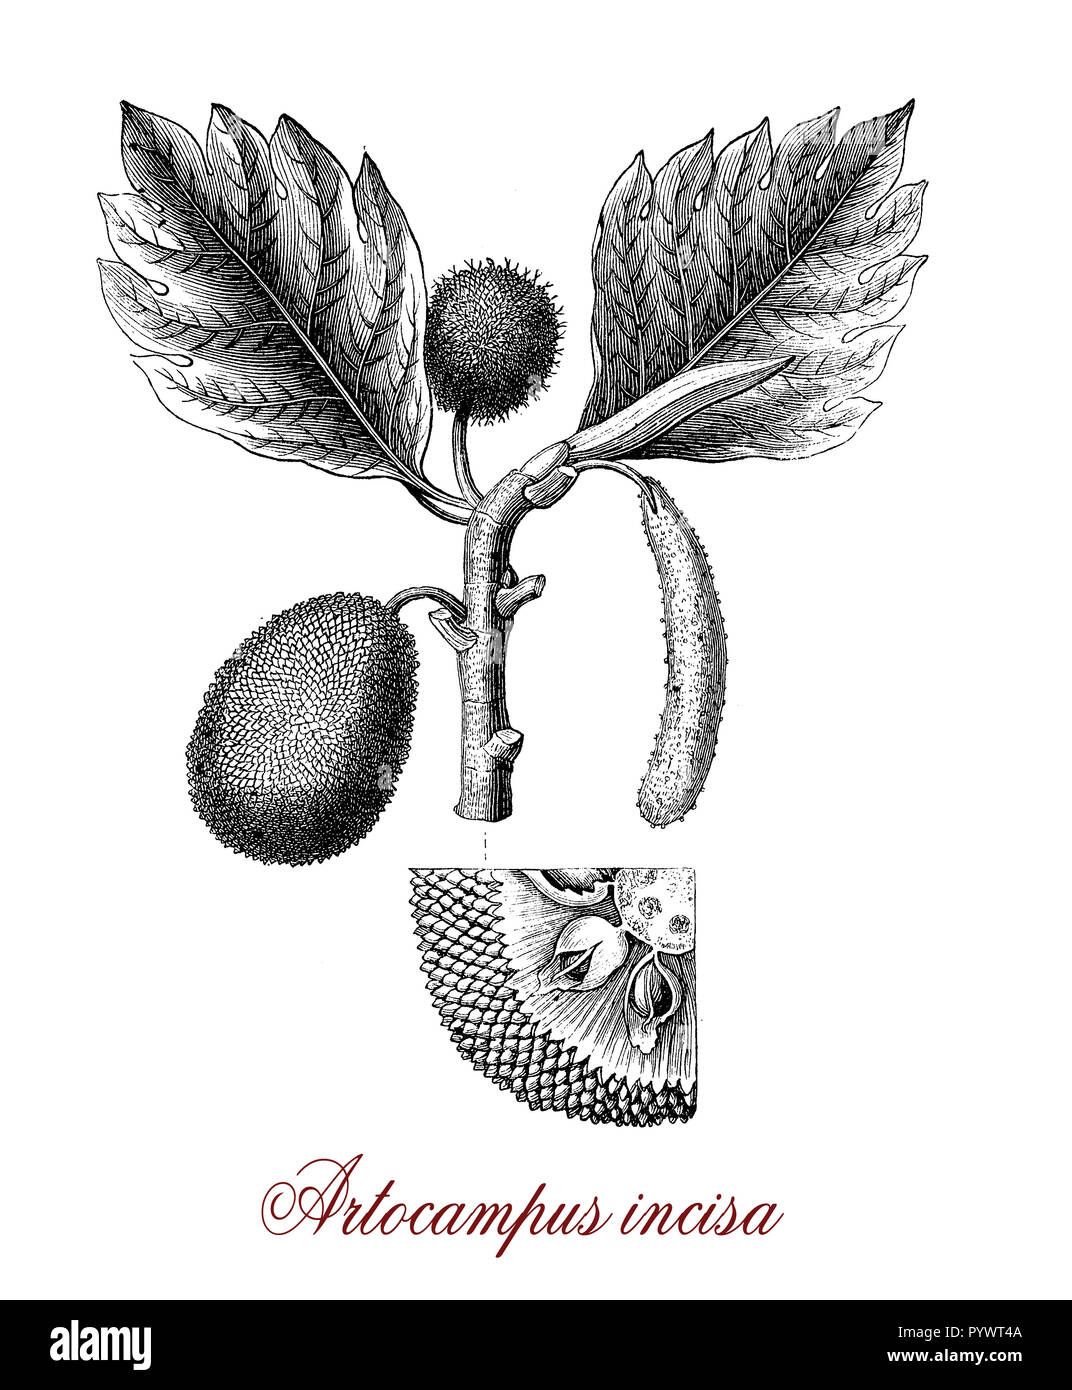 Vintage botanical engraving of Artocarpus, tropical tree of Southeast Asia and Pacific commonly cultivated for the edible fruits called breadfruits Stock Photo